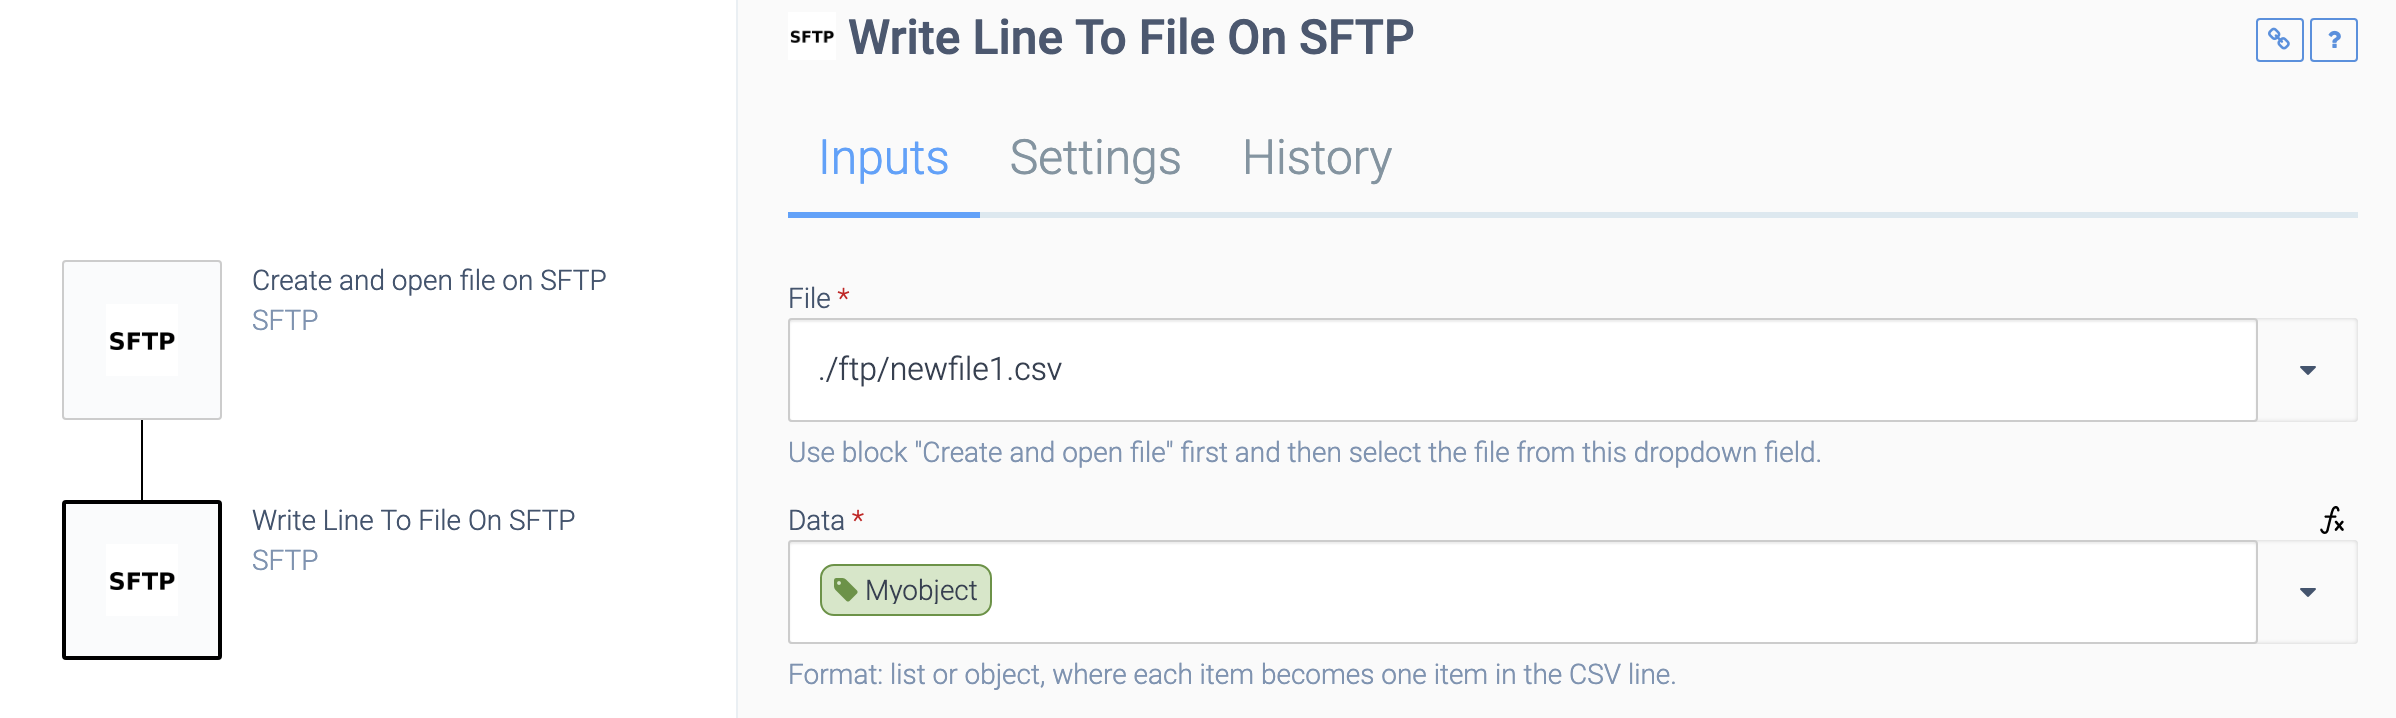 As above, but the Write Line To File On SFTP block is selected. It connects to the newly created csv file and adds an object to it.